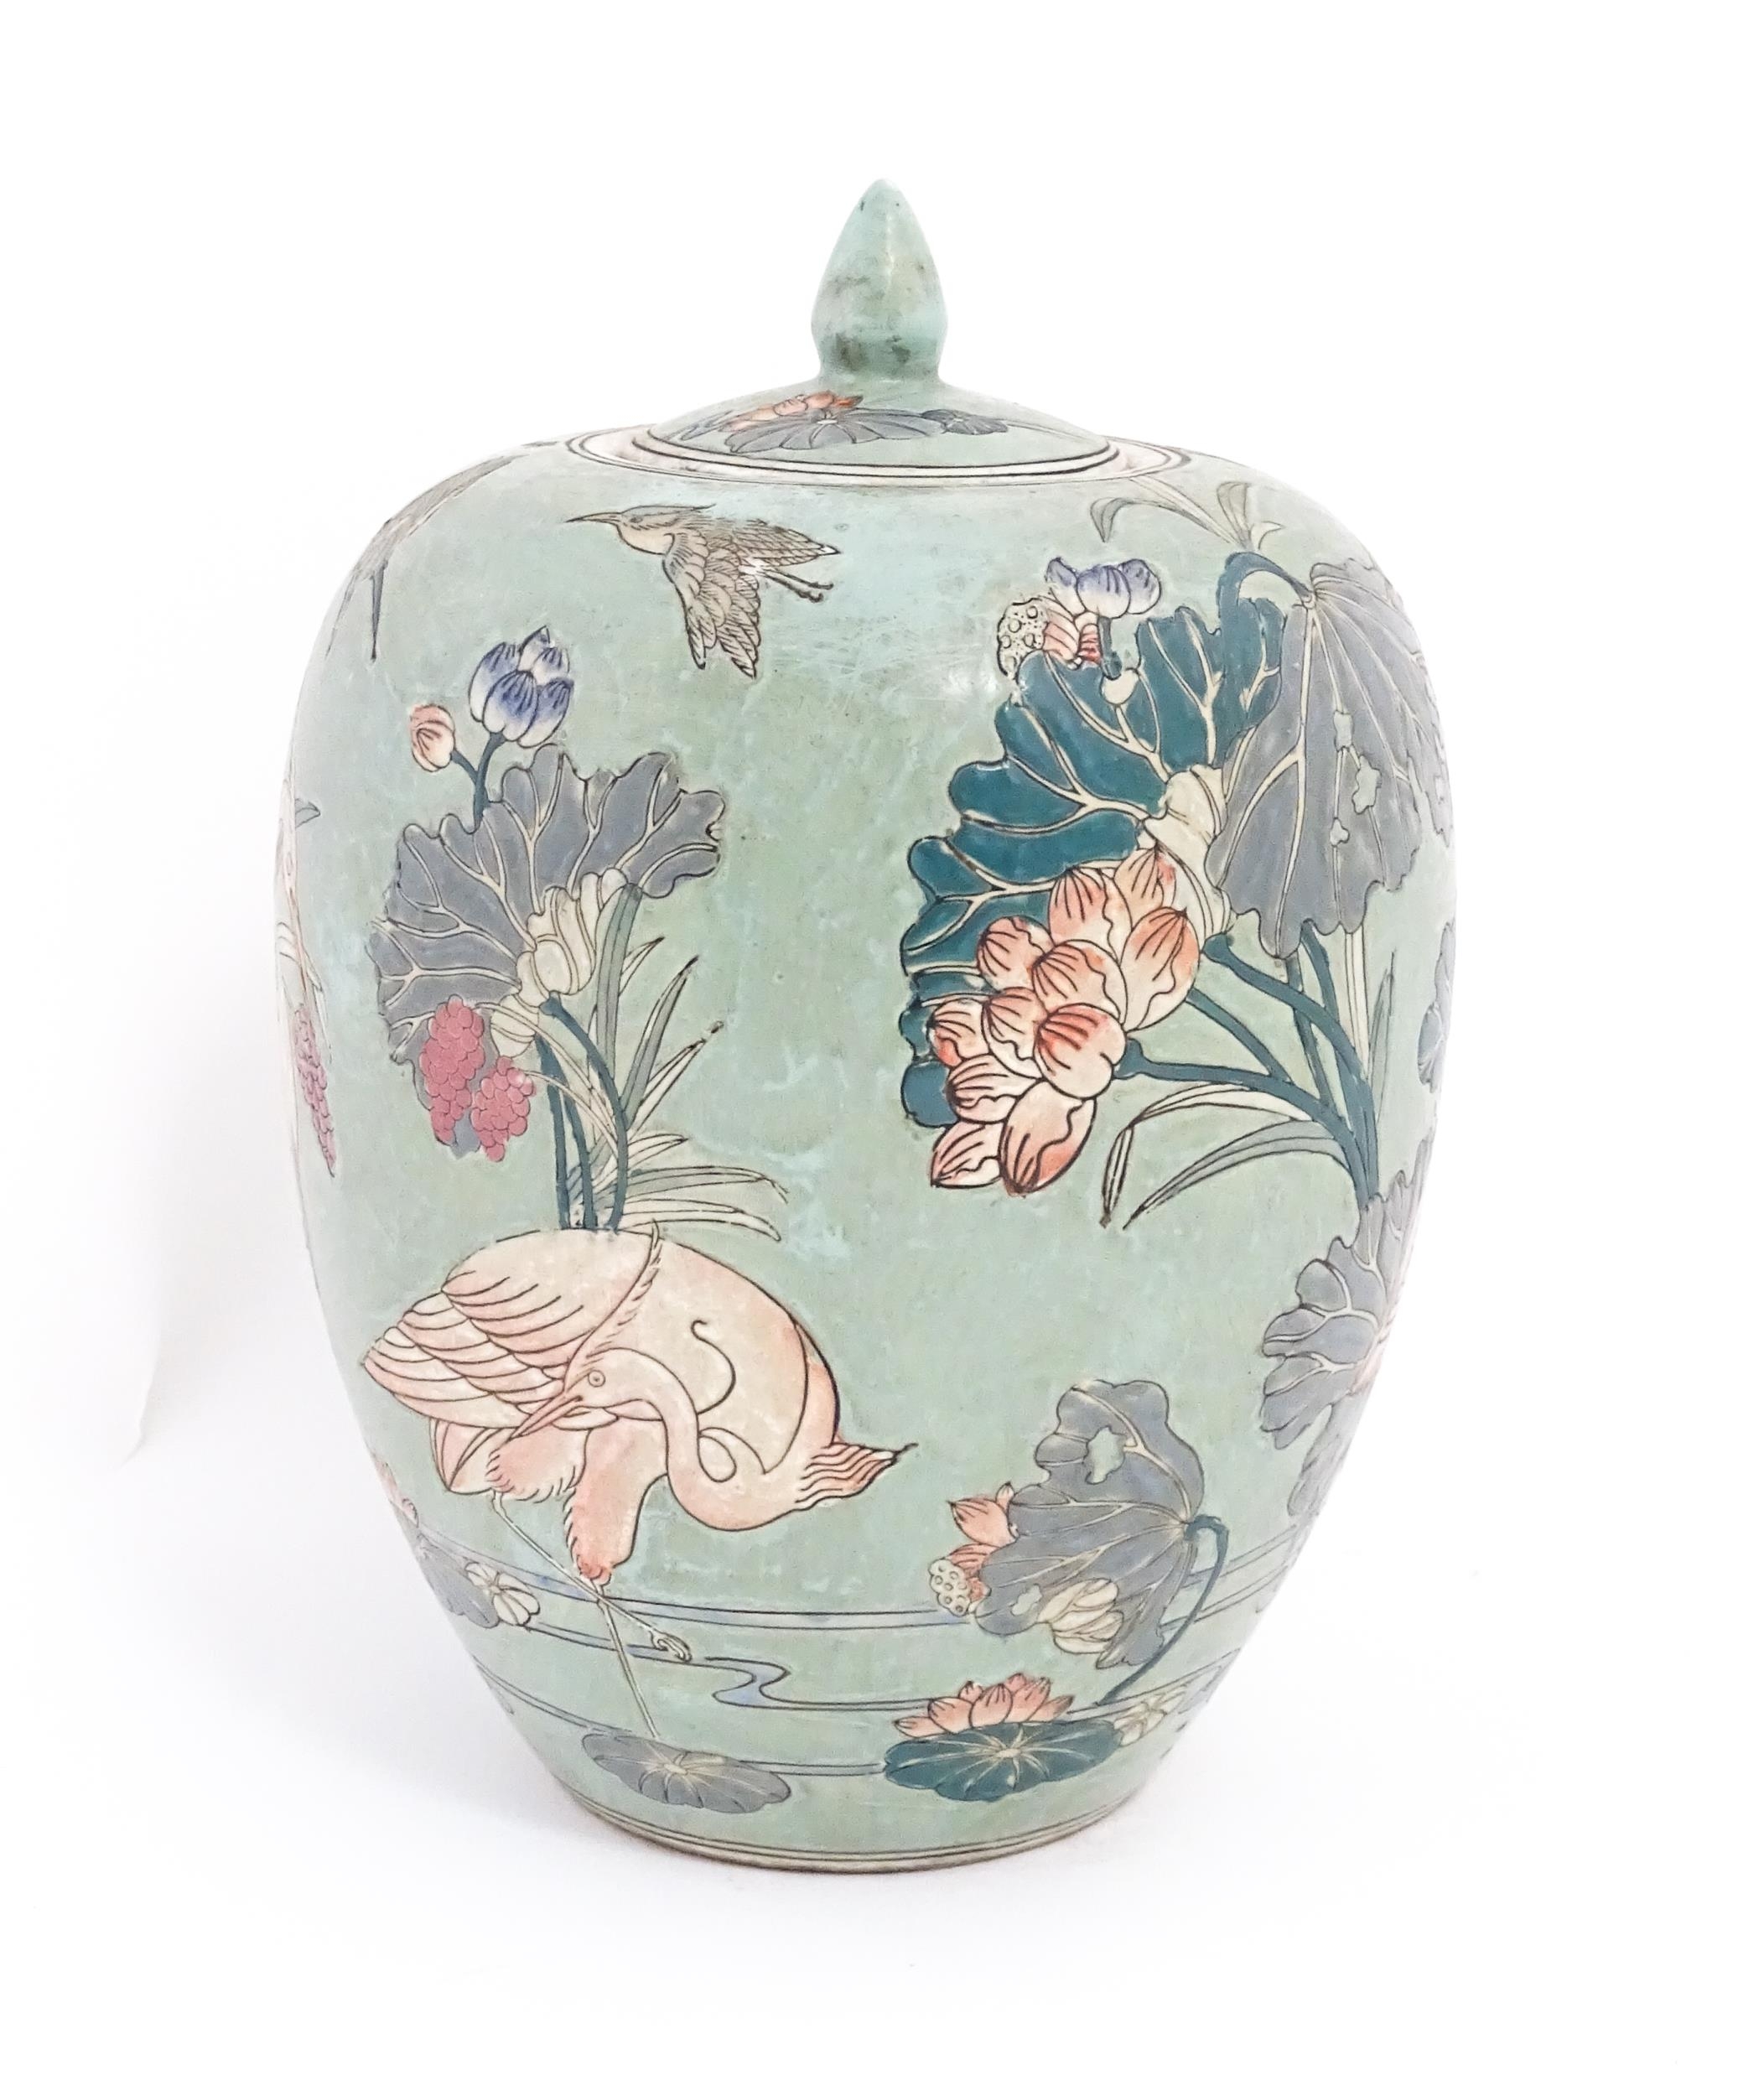 A Chinese ginger jar with celadon style glaze decorated with crane birds, flowers, lily pads, etc. - Image 5 of 8